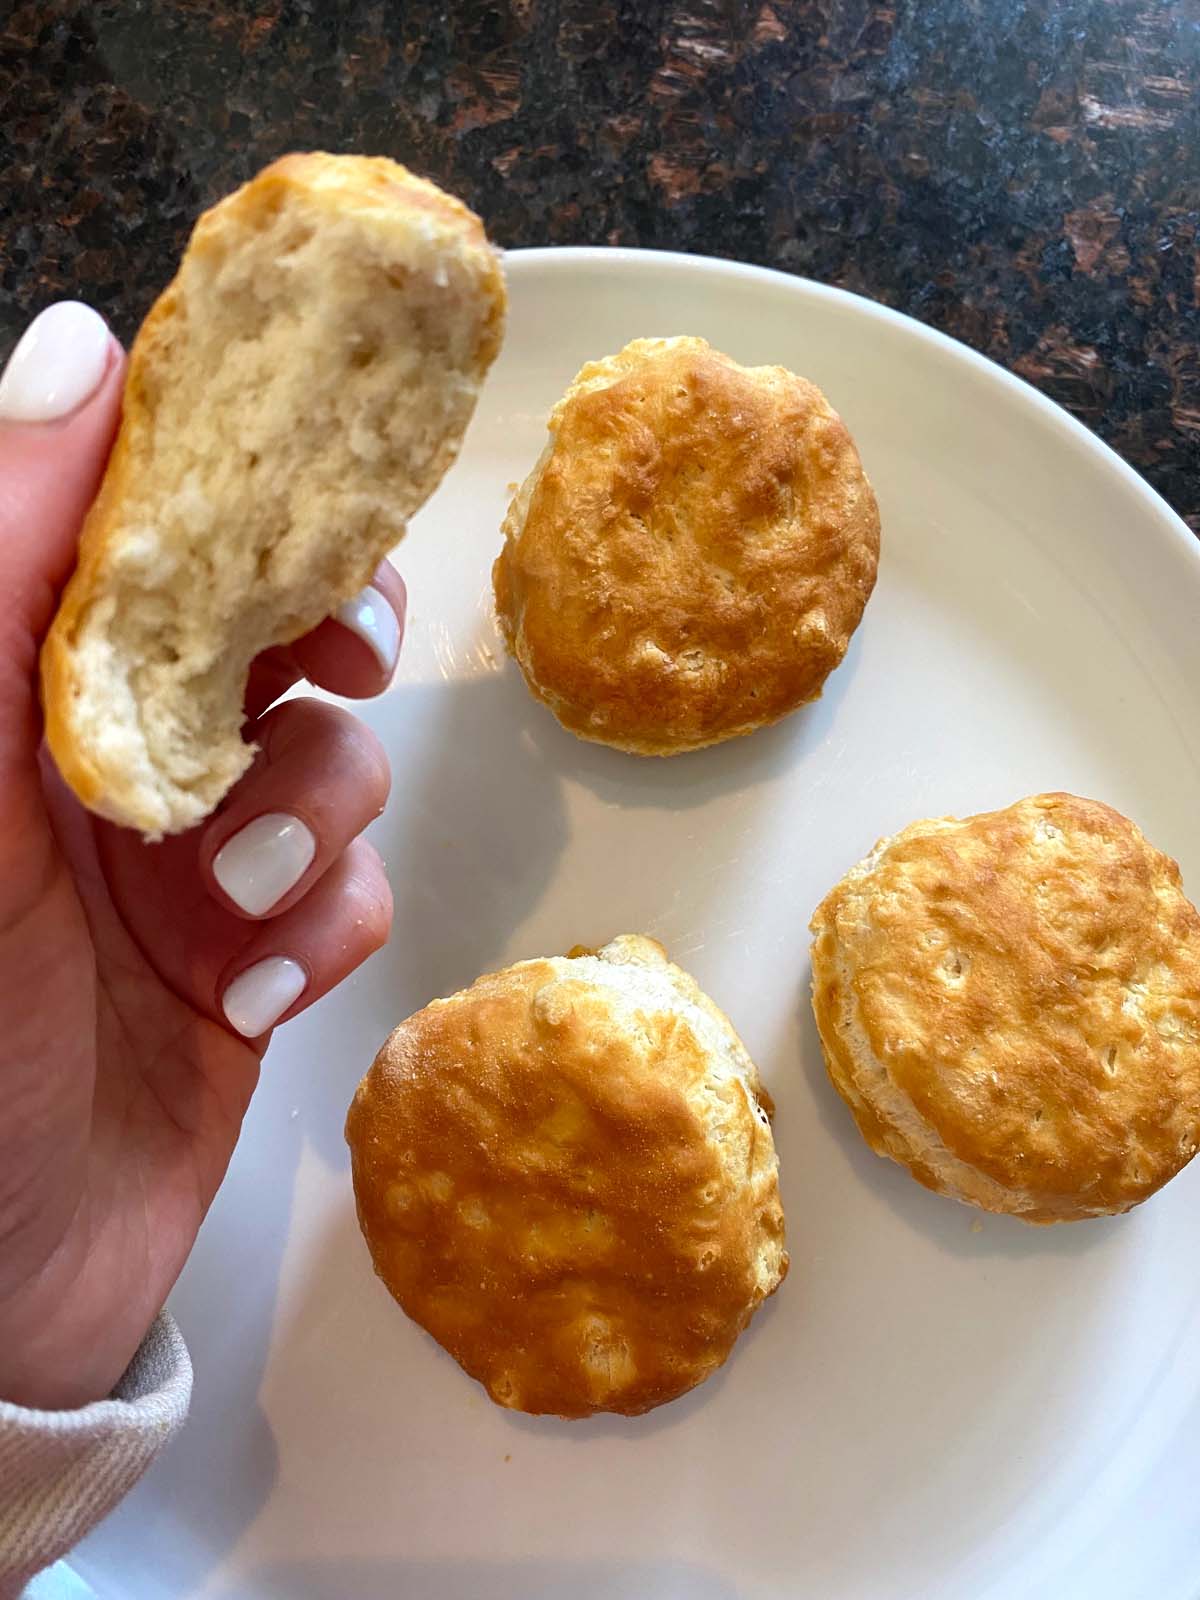 Cooked biscuits on a plate with one being held up.